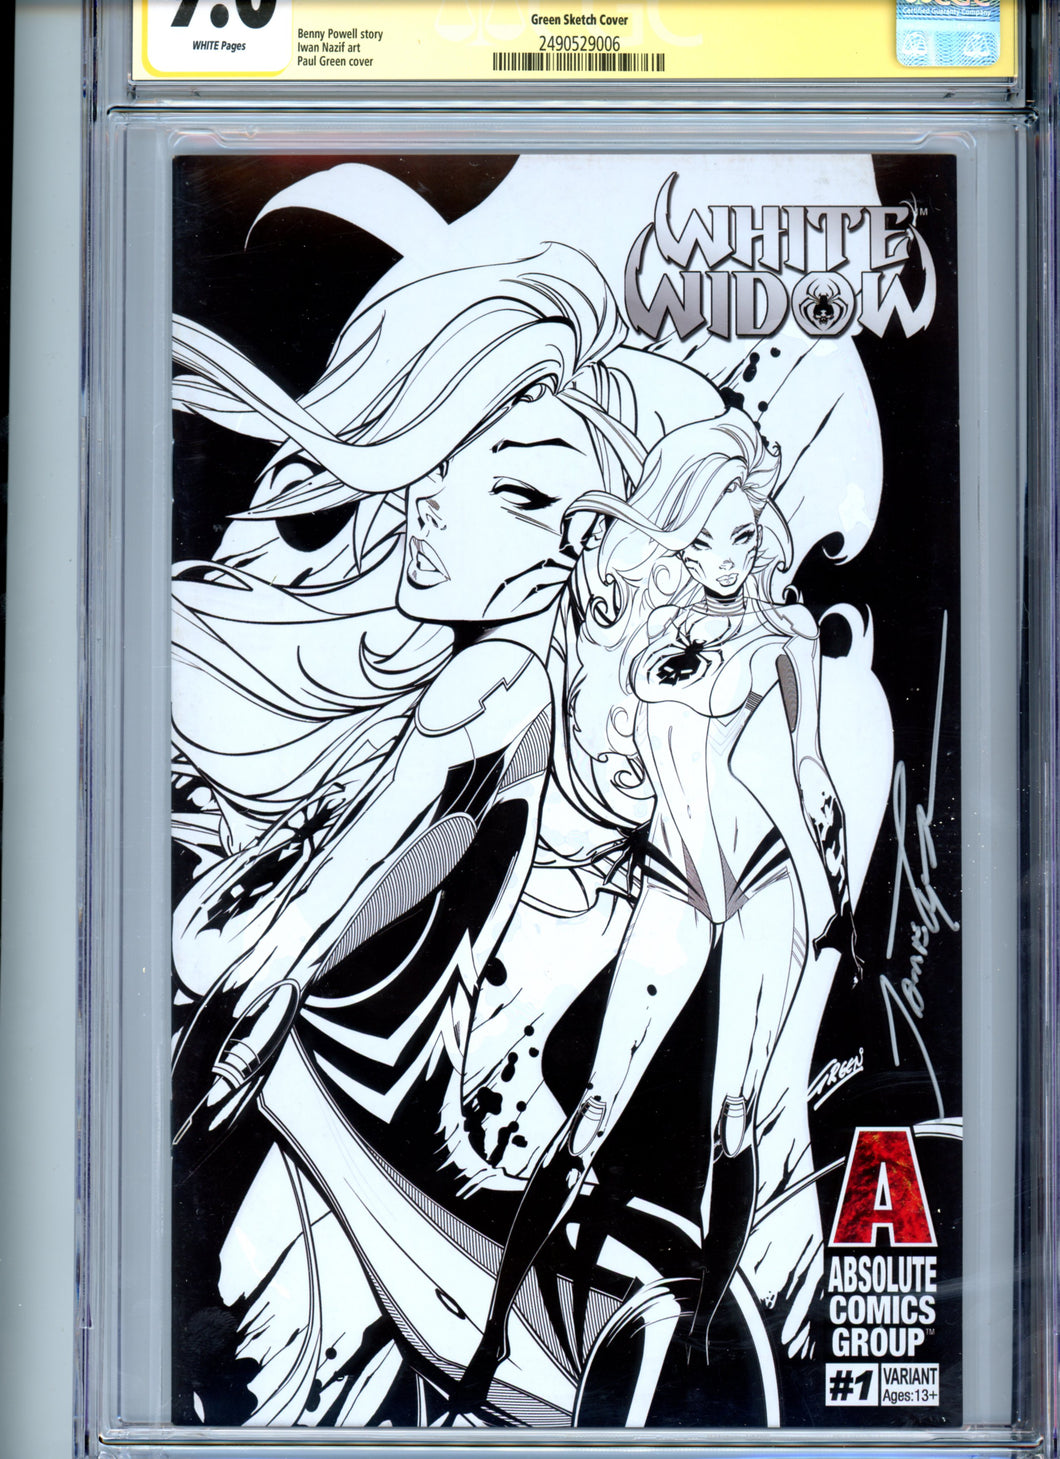 White Widow #1 - Paul Green Sketch Cover (Very Limited!) CGC 9.0 - Signed Tyndall